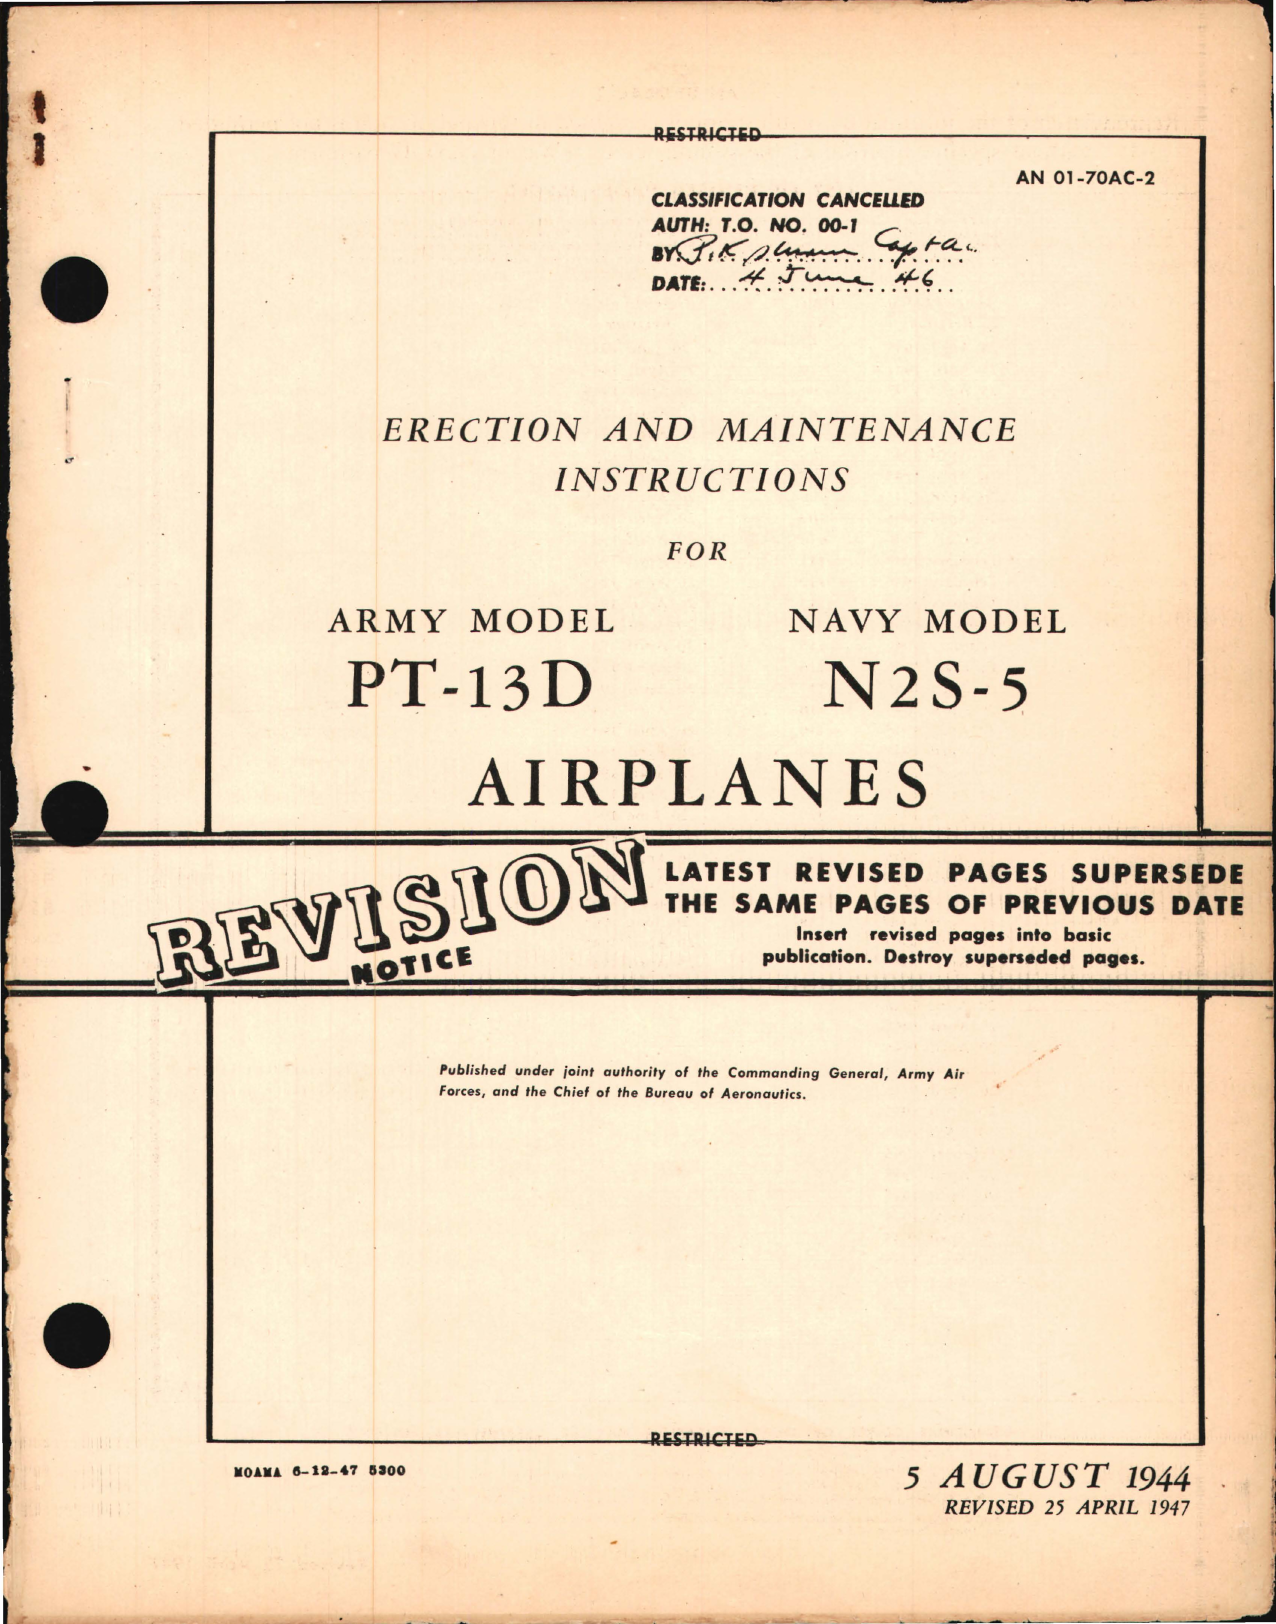 Sample page 1 from AirCorps Library document: Erection and Maintenance Instructions for PT-13D and N2S-5